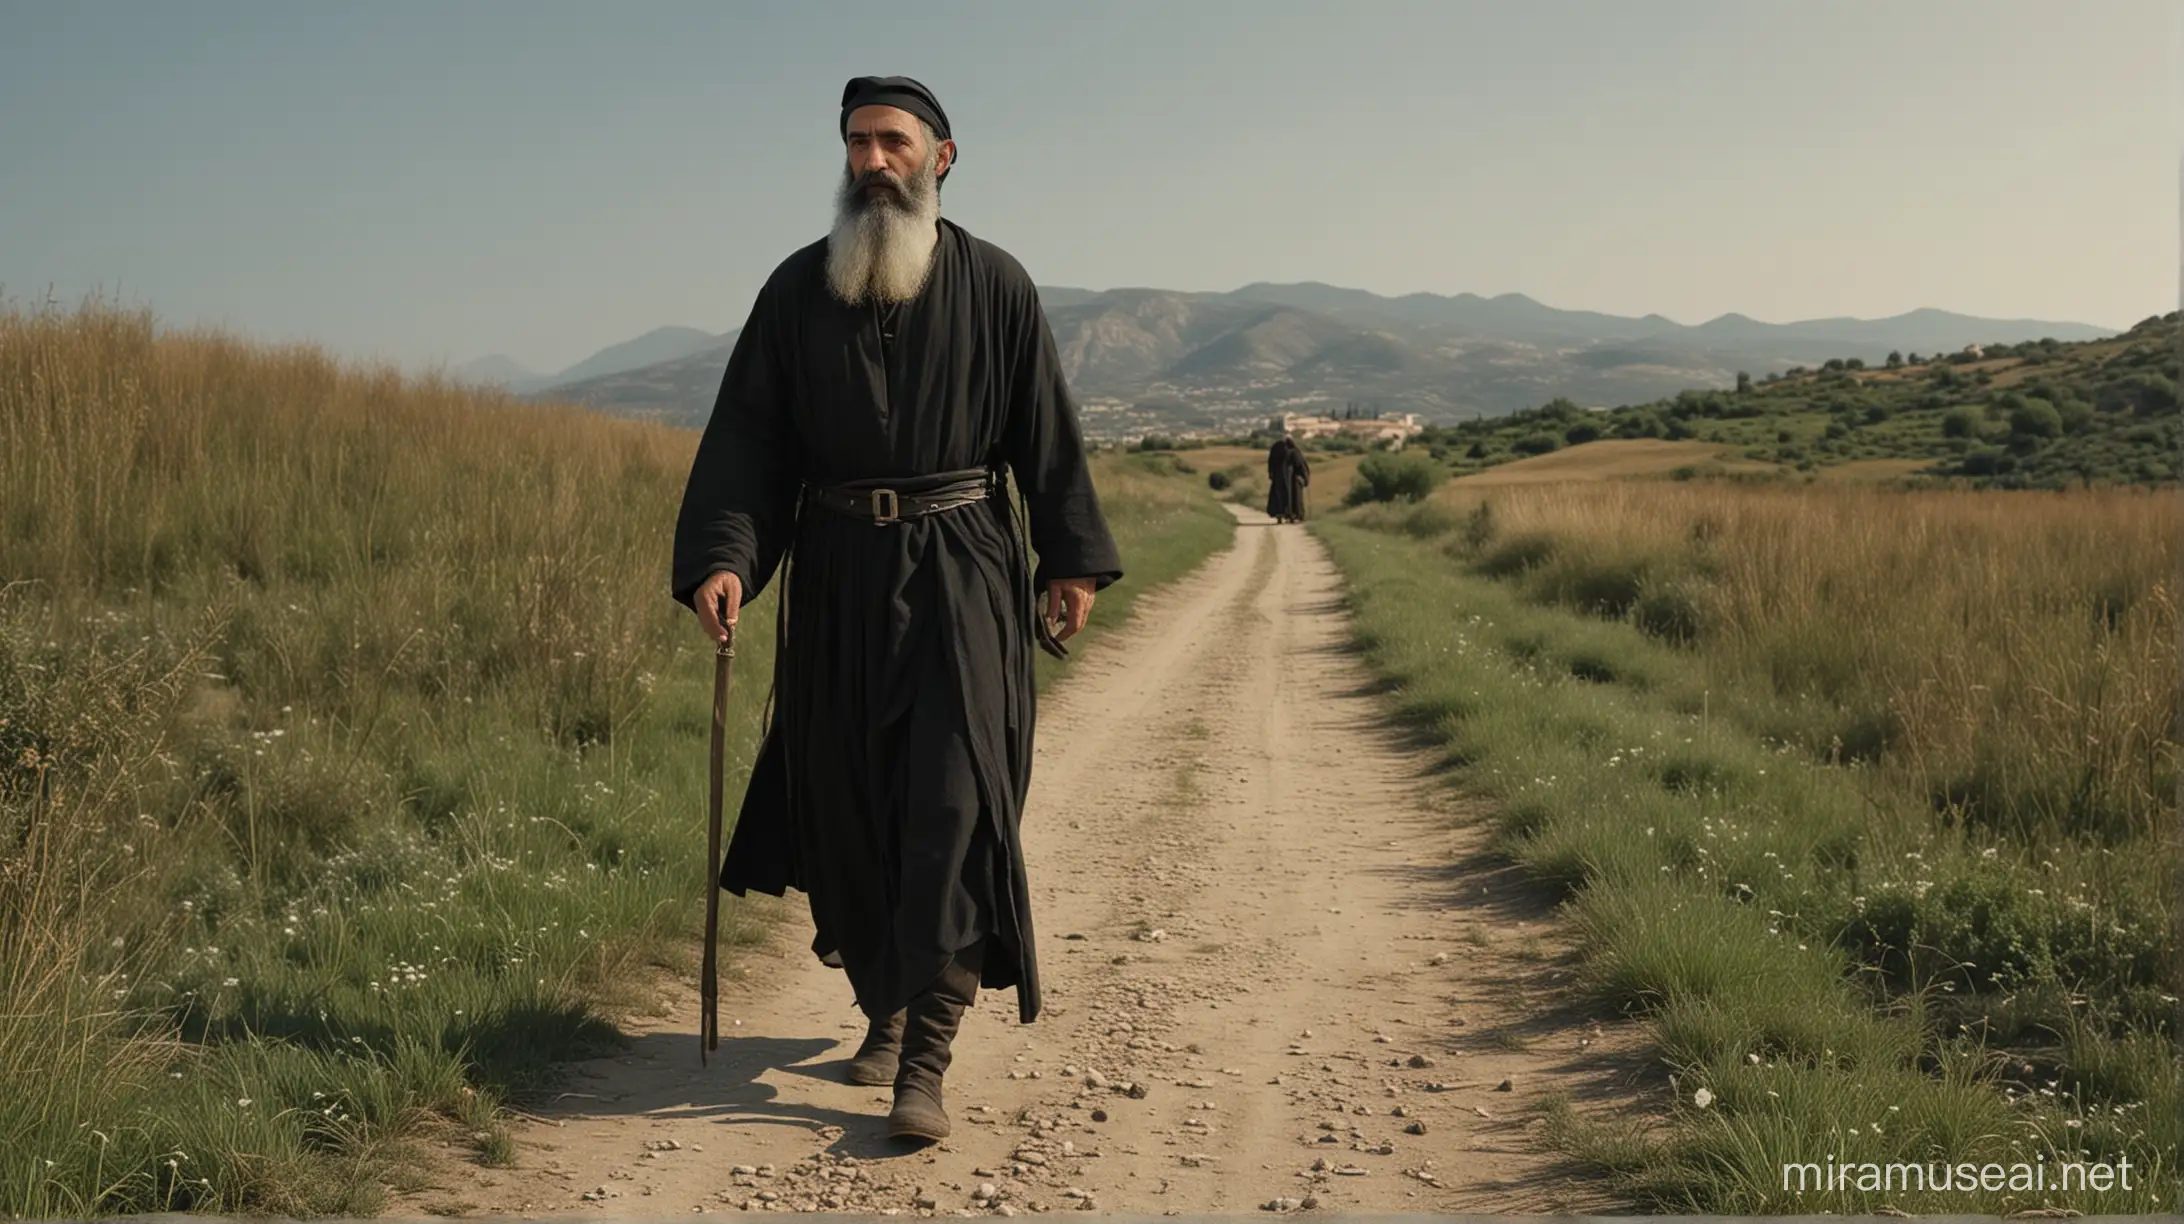 Saint Cosmas of Aetolia, midle-age man with long  beard of short stature, the clothing is black and similar to that of a Greek Orthodox monk, 18th century, Greece, Saint Cosmas is walking alone by a path in the greek field, front, historical hyperrealistic cinematography